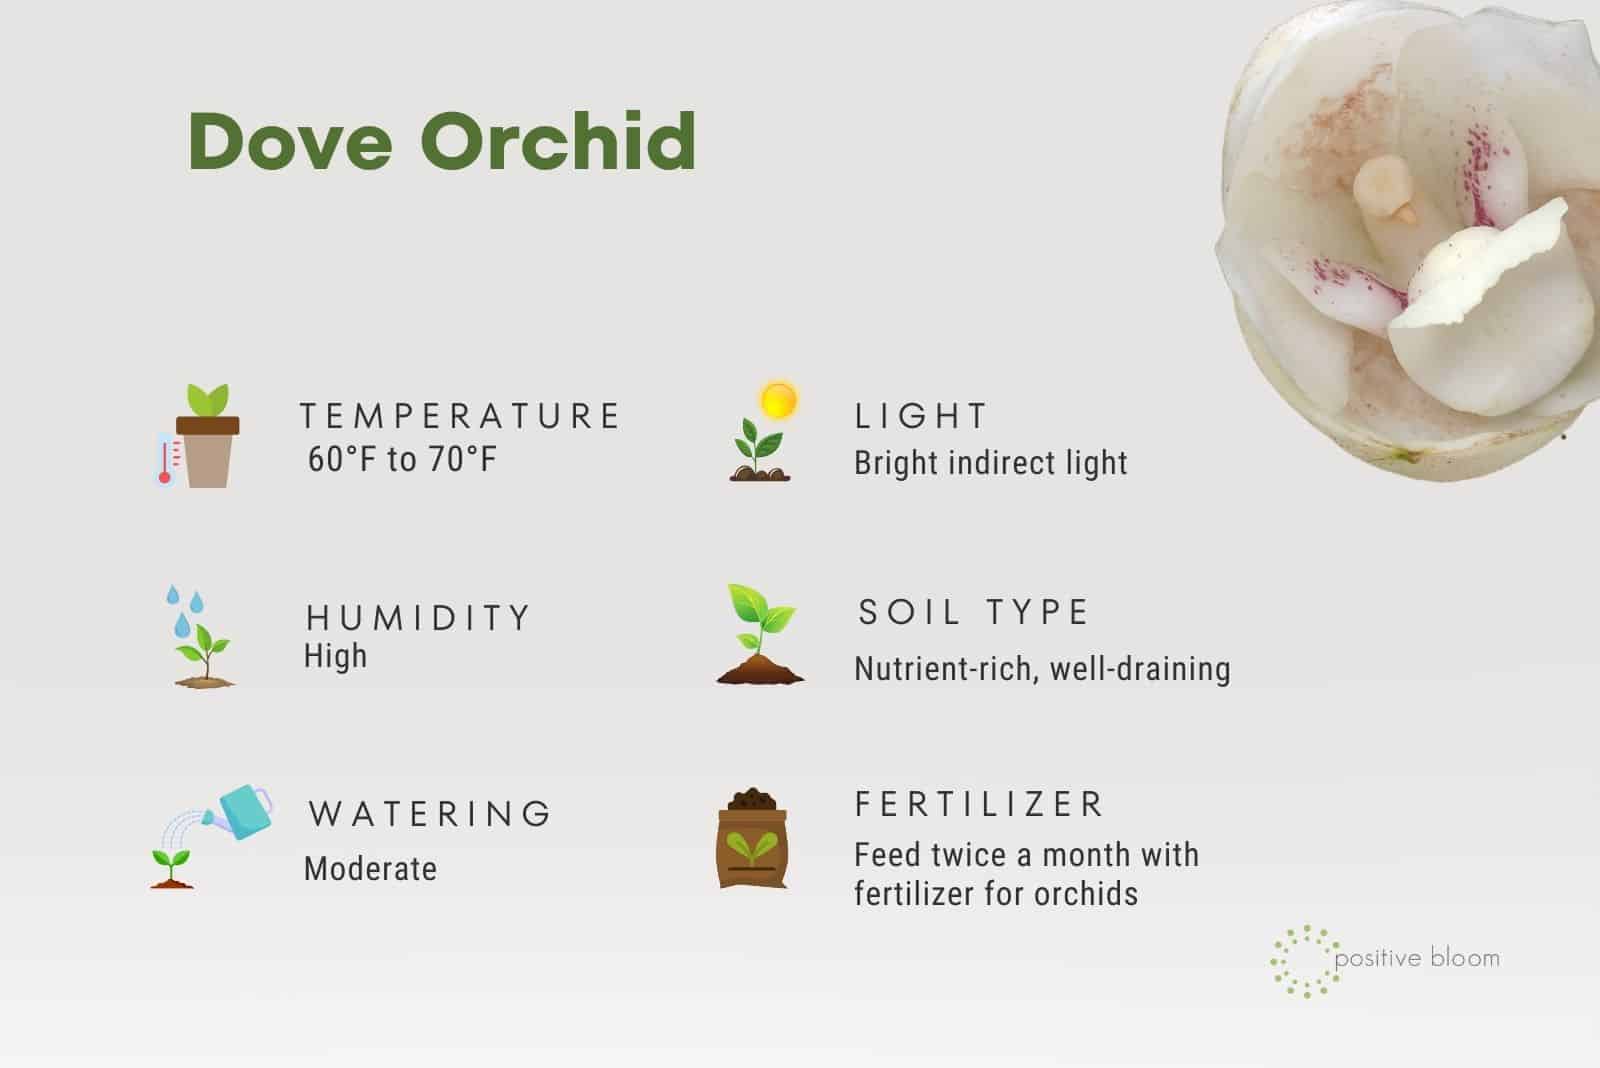 Dove Orchid facts